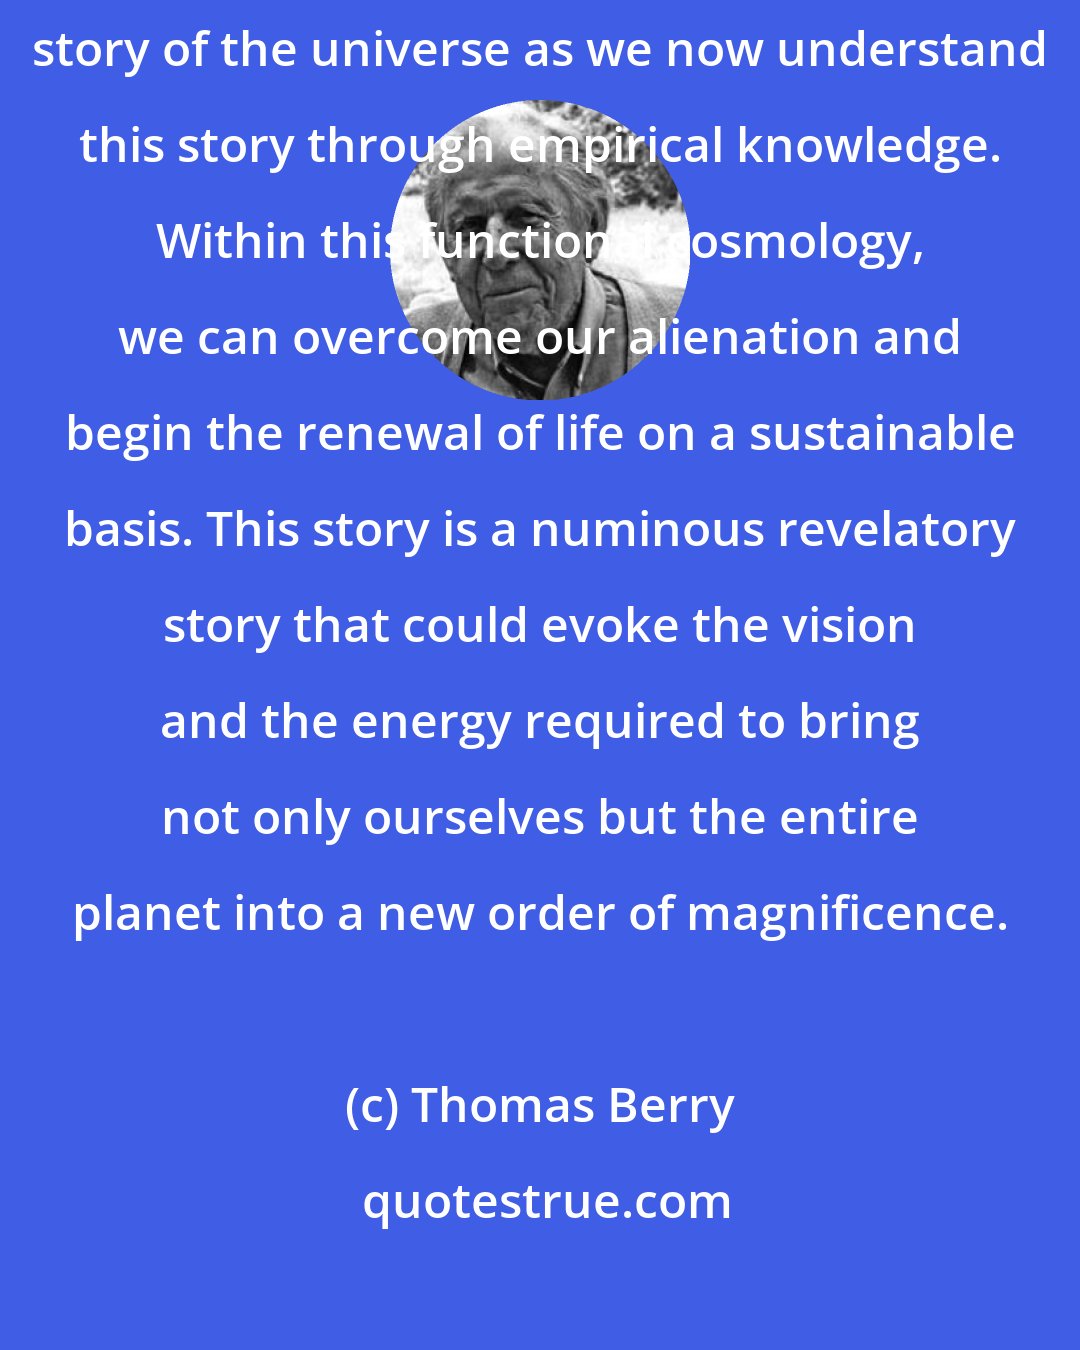 Thomas Berry: Both education and religion need to ground themselves within the story of the universe as we now understand this story through empirical knowledge. Within this functional cosmology, we can overcome our alienation and begin the renewal of life on a sustainable basis. This story is a numinous revelatory story that could evoke the vision and the energy required to bring not only ourselves but the entire planet into a new order of magnificence.